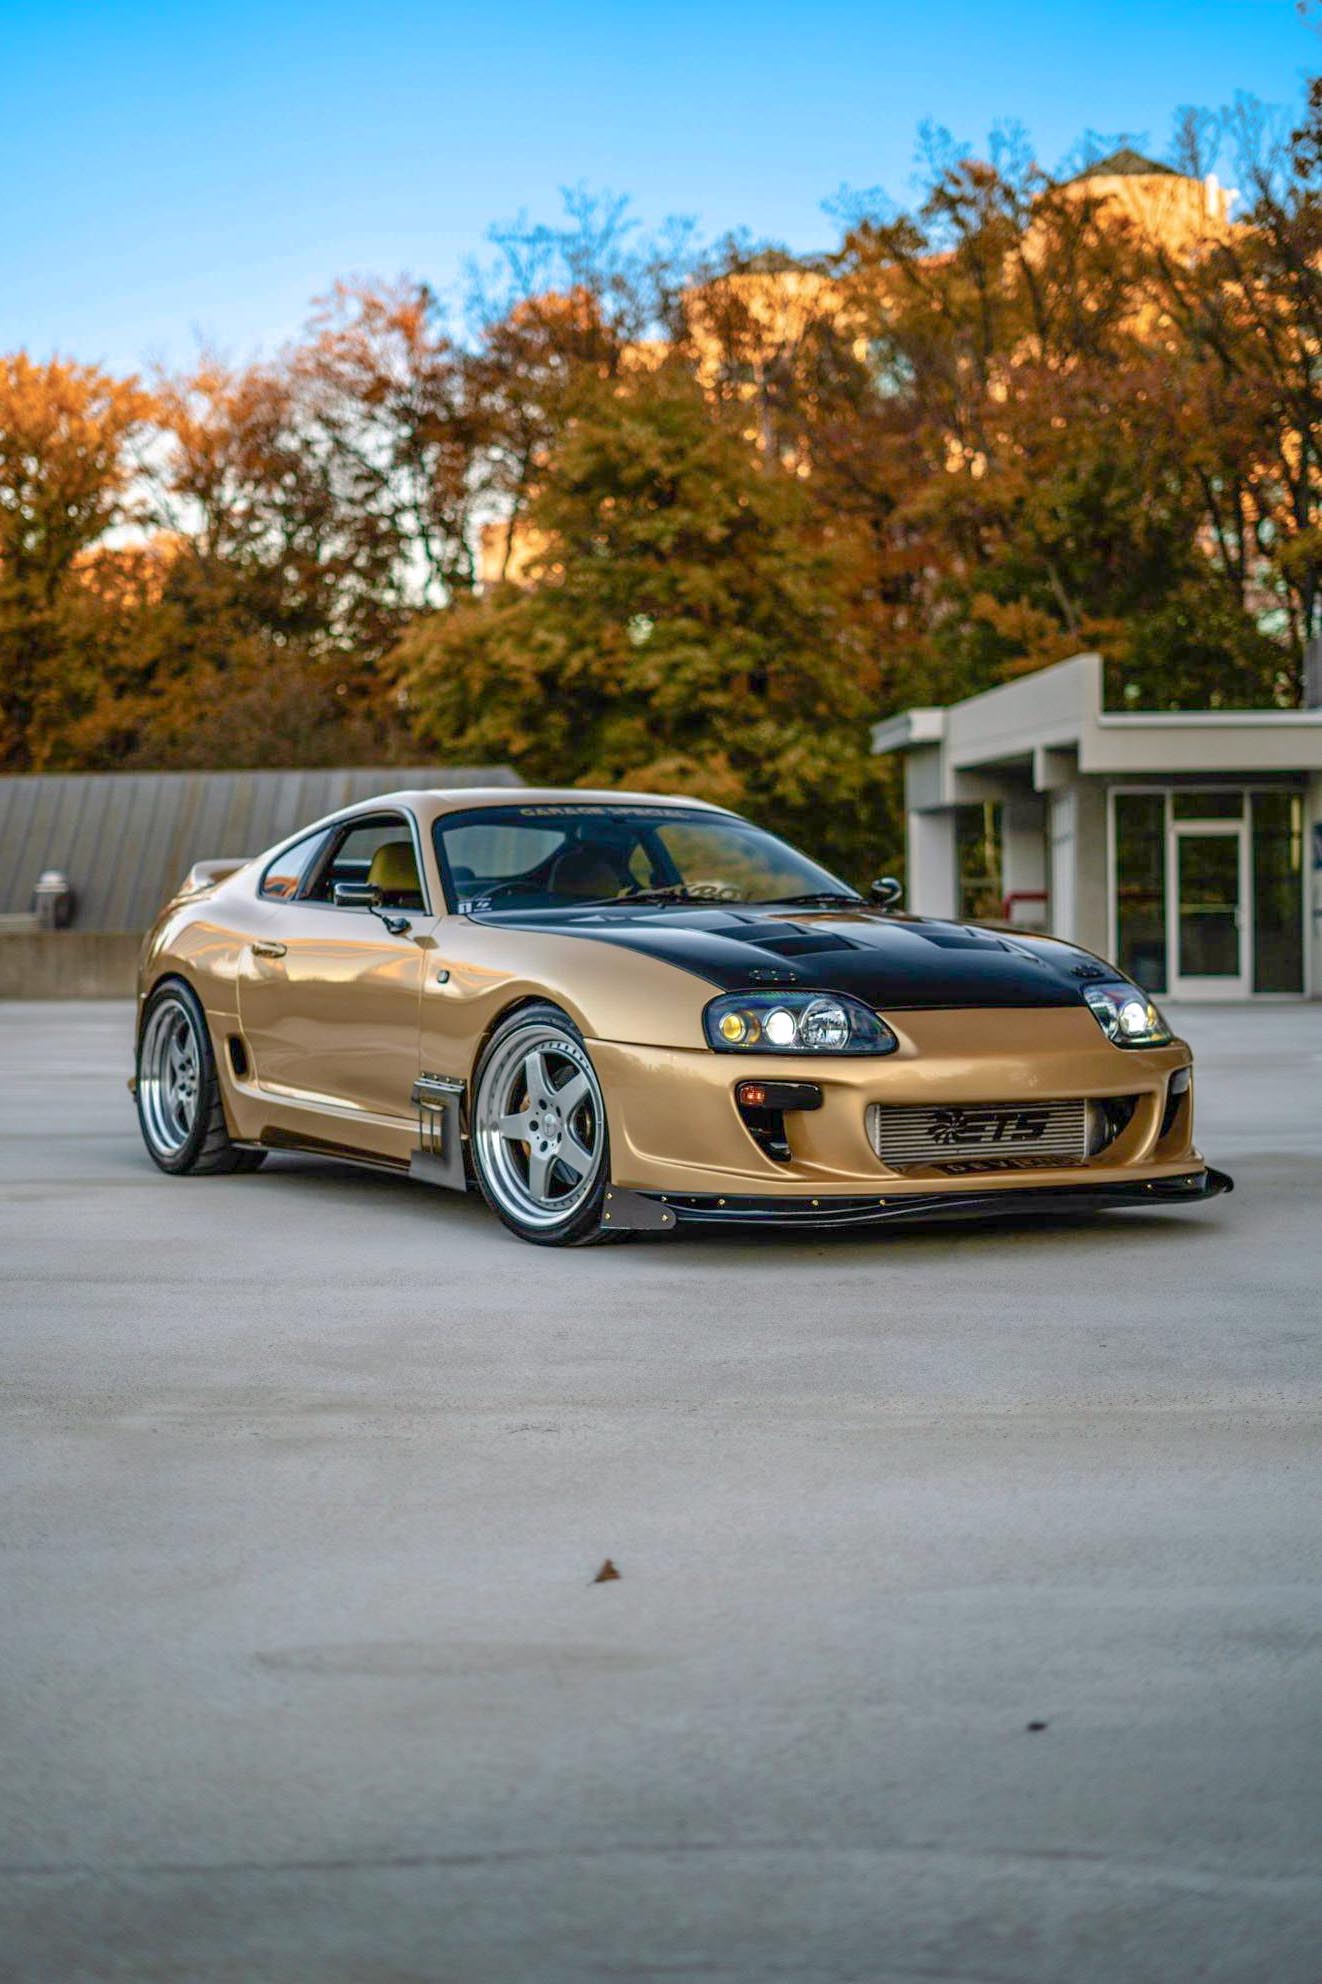 What If The Mk5 Toyota Supra Looked More Like Its Mk4 Predecessor?